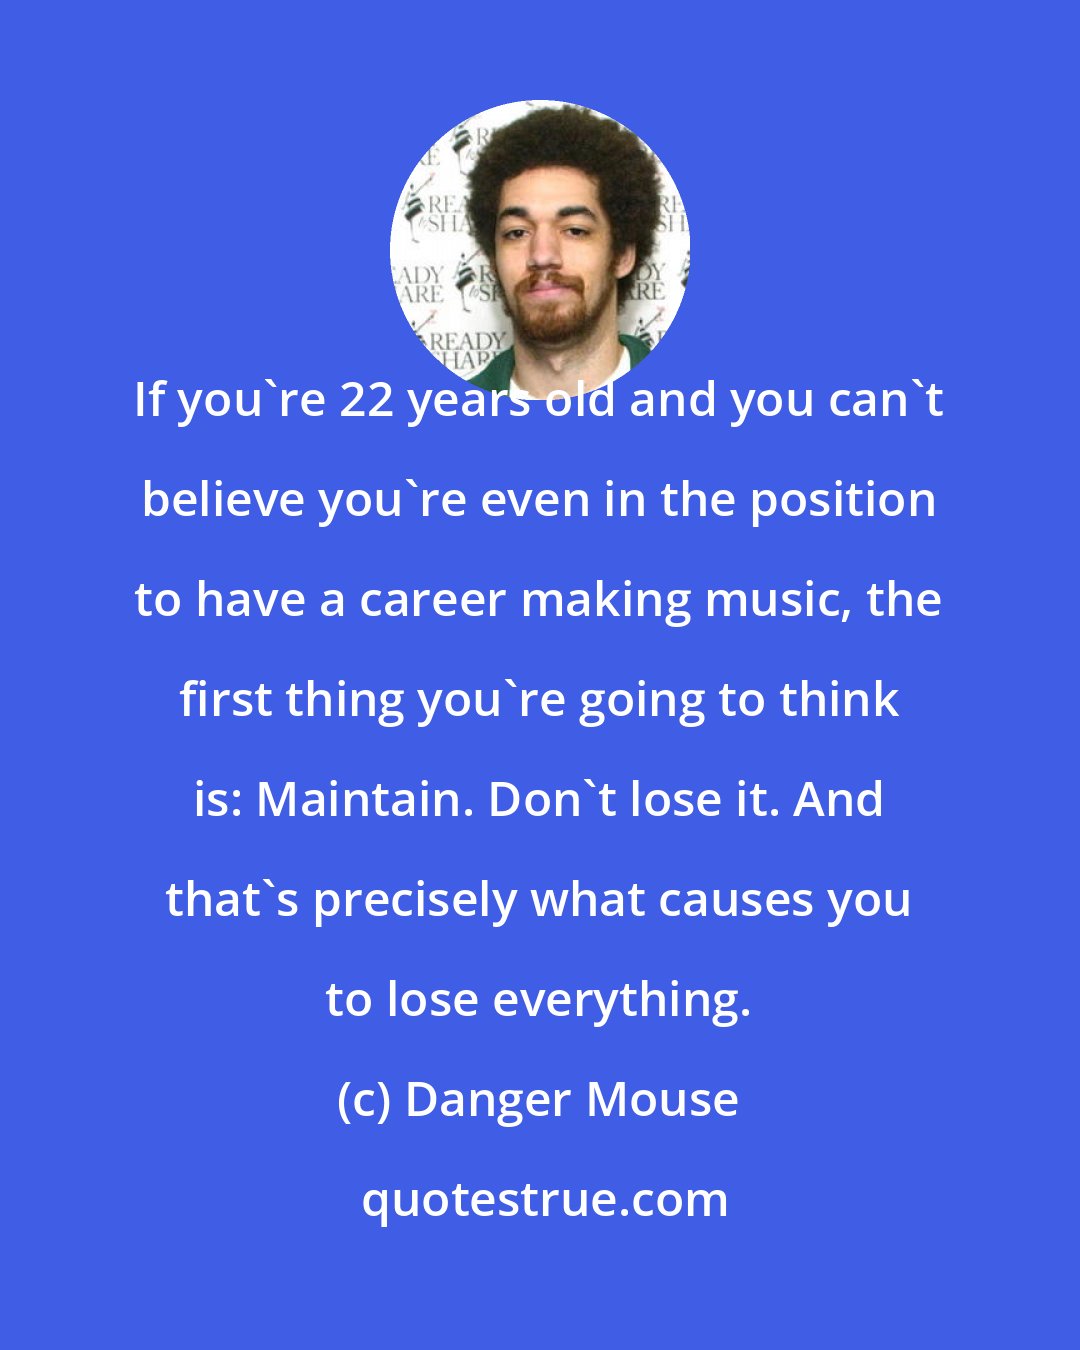 Danger Mouse: If you're 22 years old and you can't believe you're even in the position to have a career making music, the first thing you're going to think is: Maintain. Don't lose it. And that's precisely what causes you to lose everything.